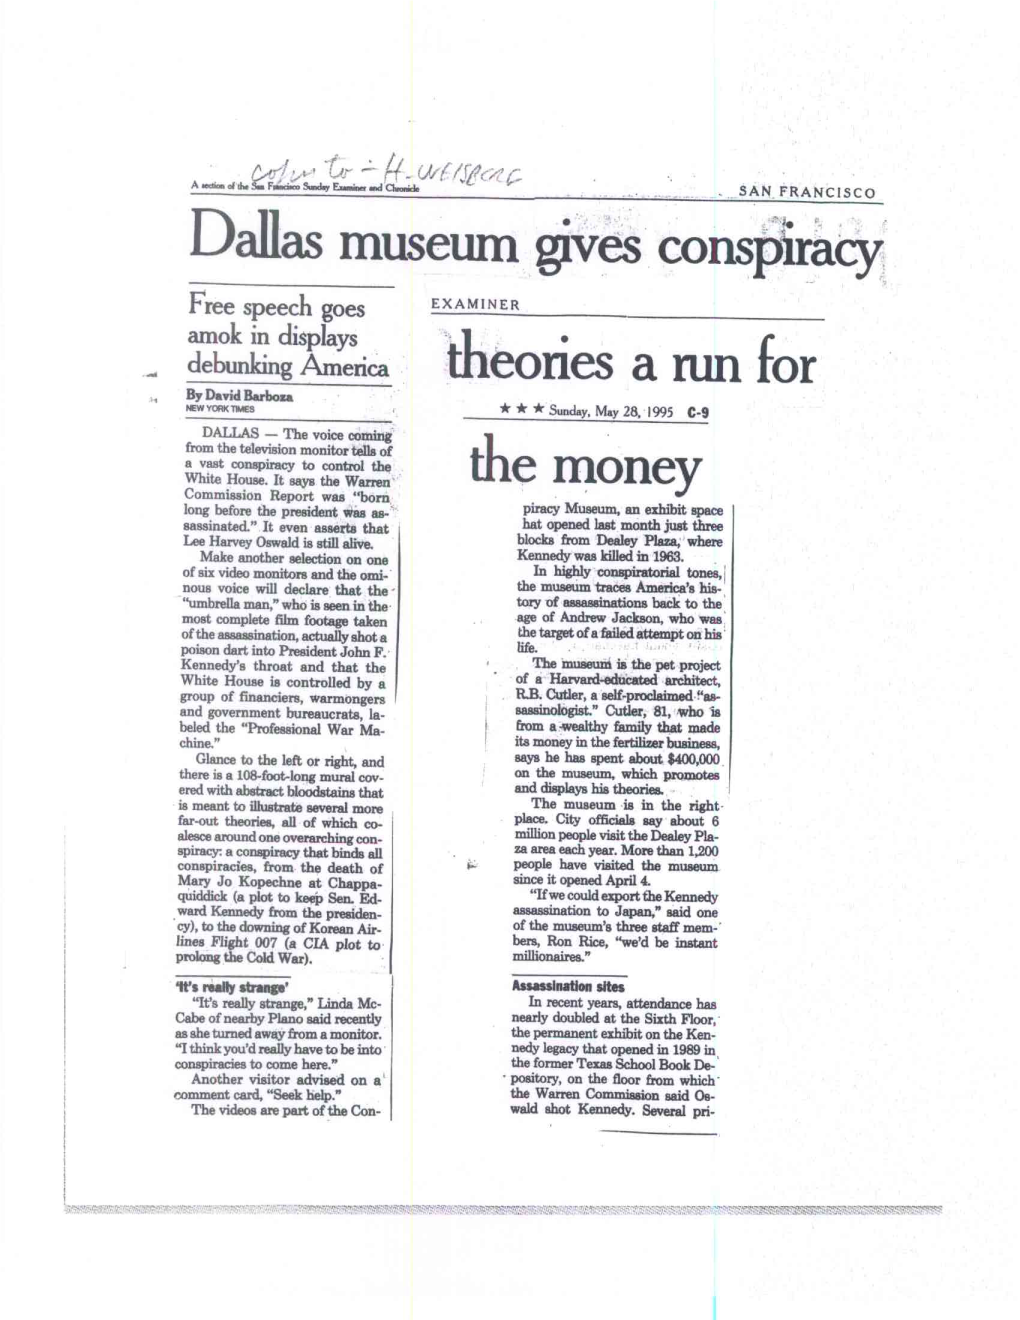 Dallas Museum Gives Conspiracy the Money Theories a Run